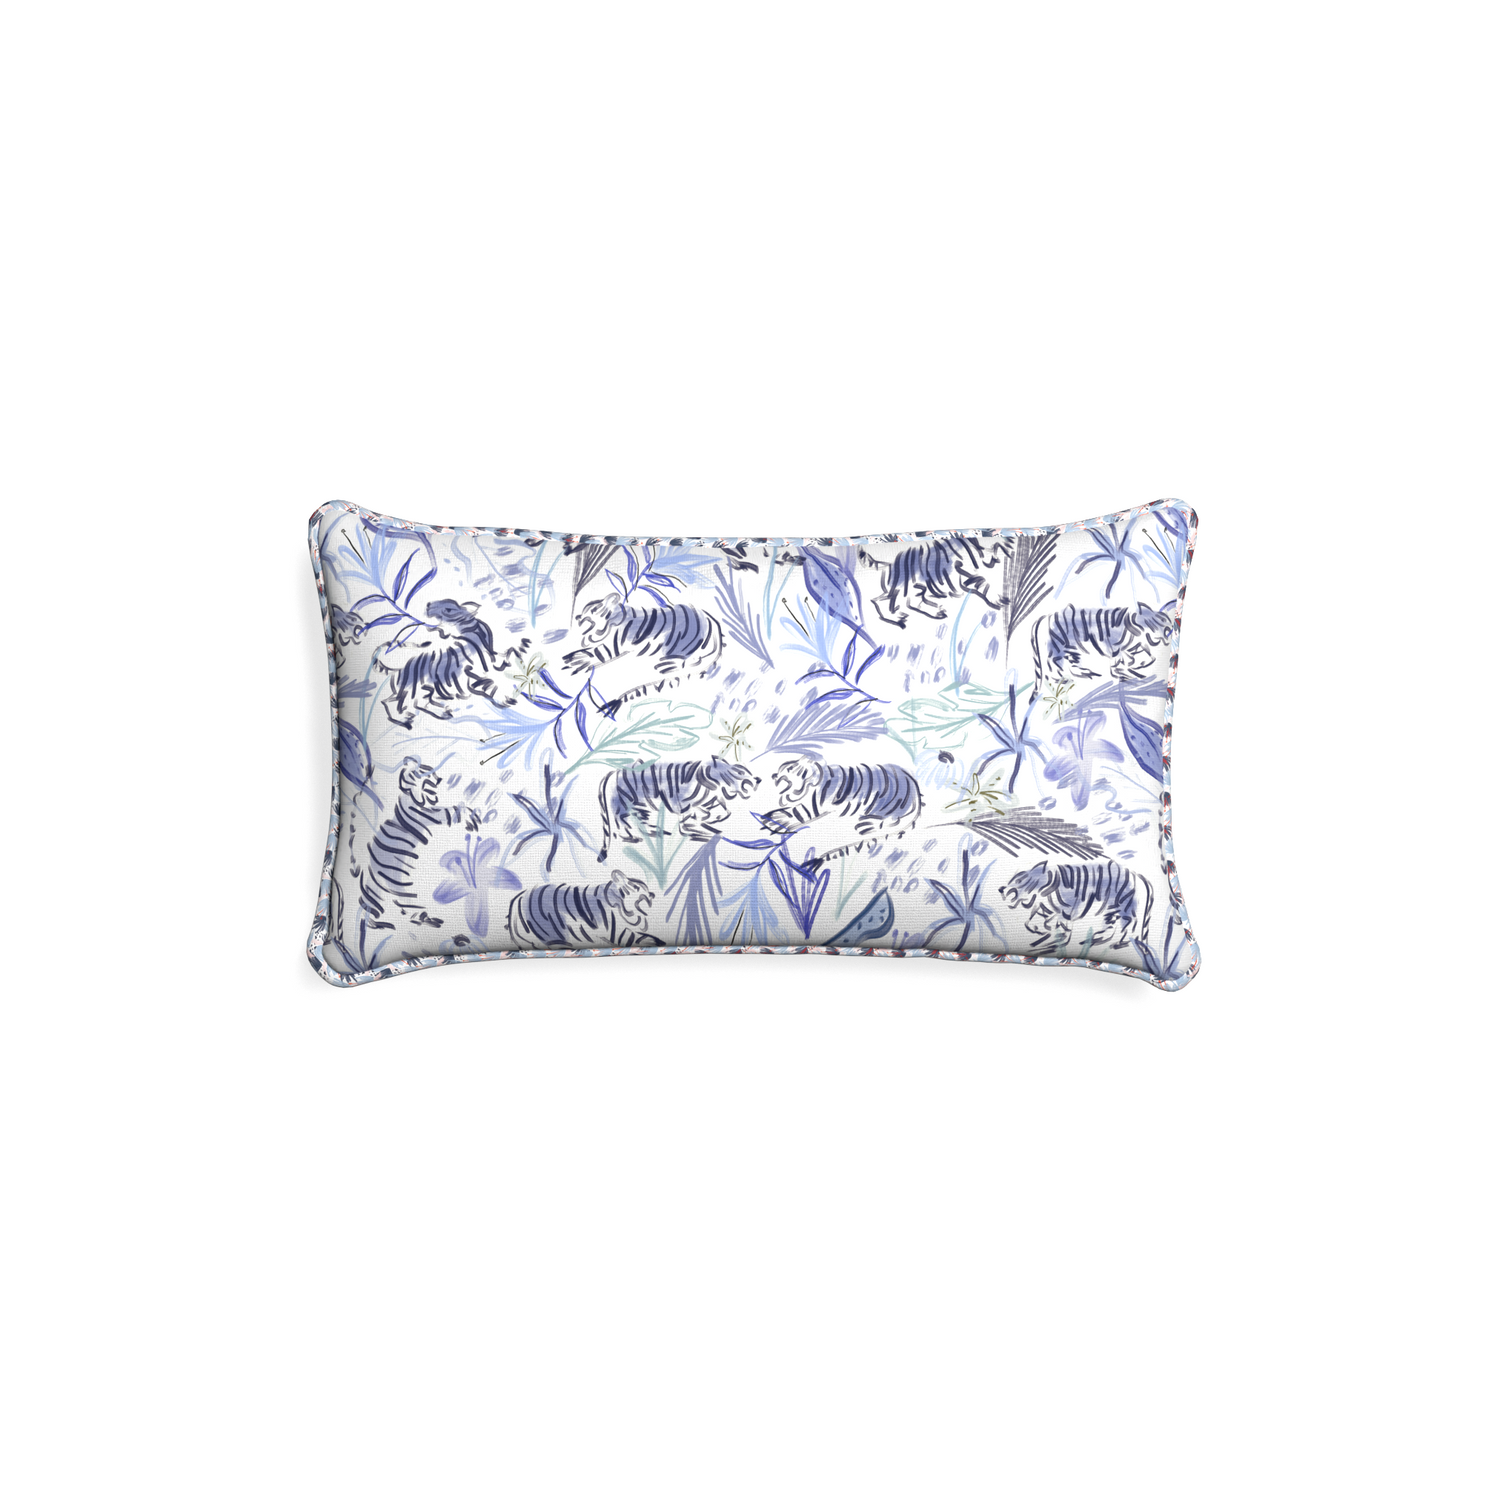 Petite-lumbar frida blue custom blue with intricate tiger designpillow with e piping on white background